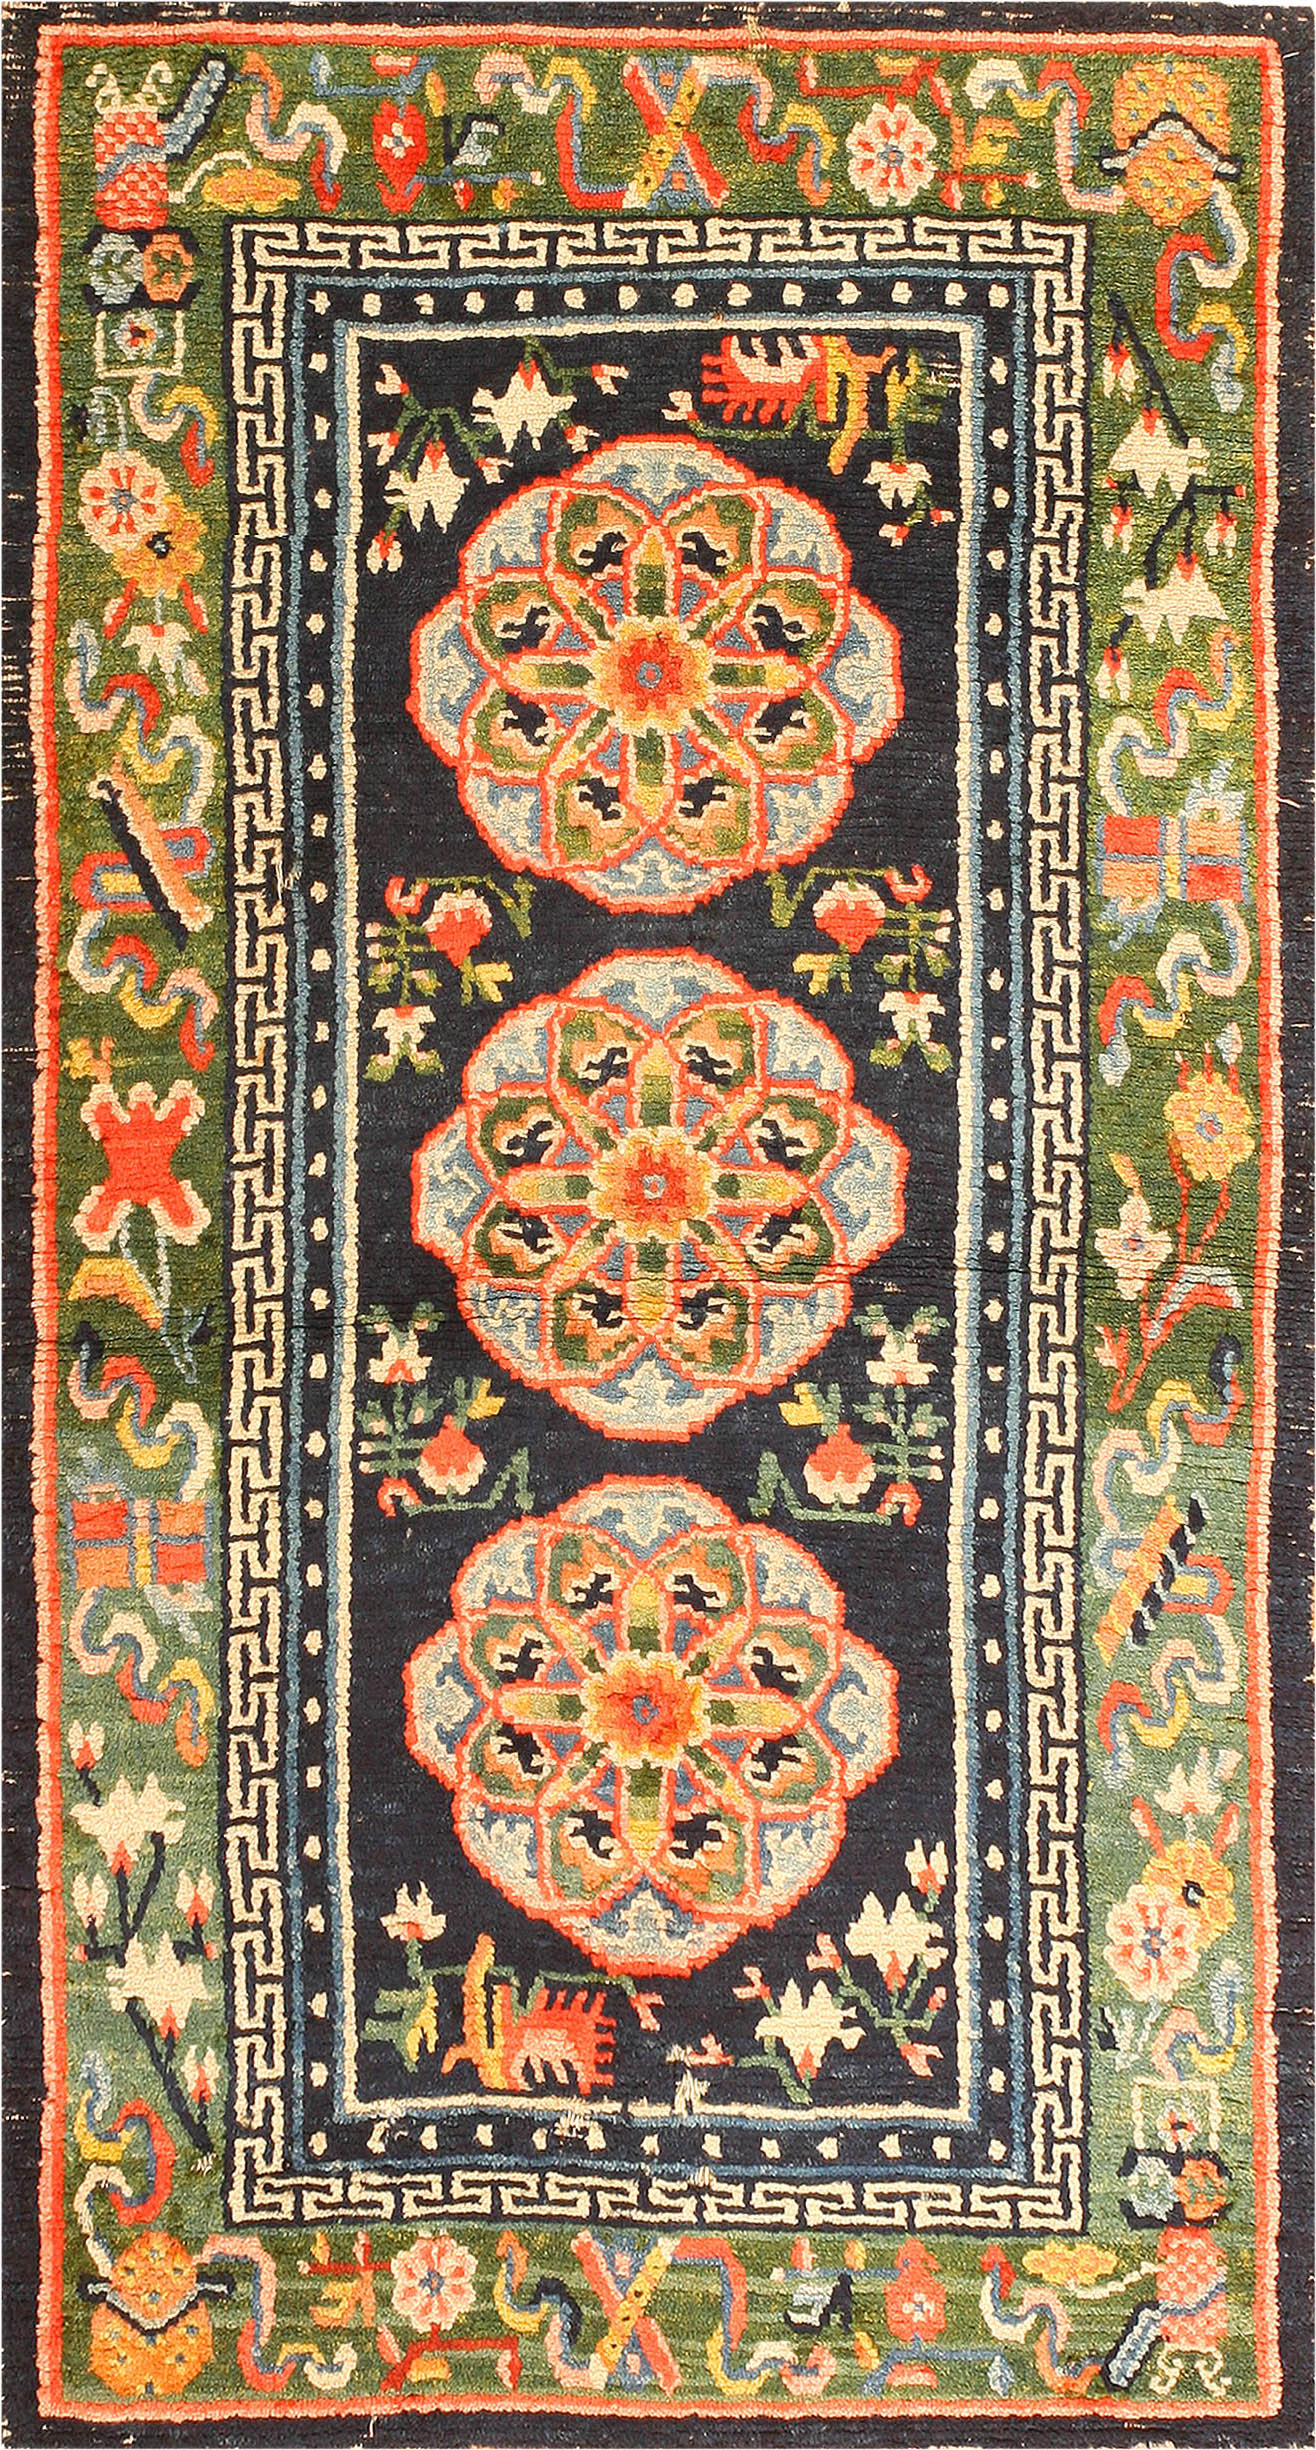 MUSEUM QUALITY COLLECTION OF ASIAN ANTIQUES, ORIENTAL RUGS